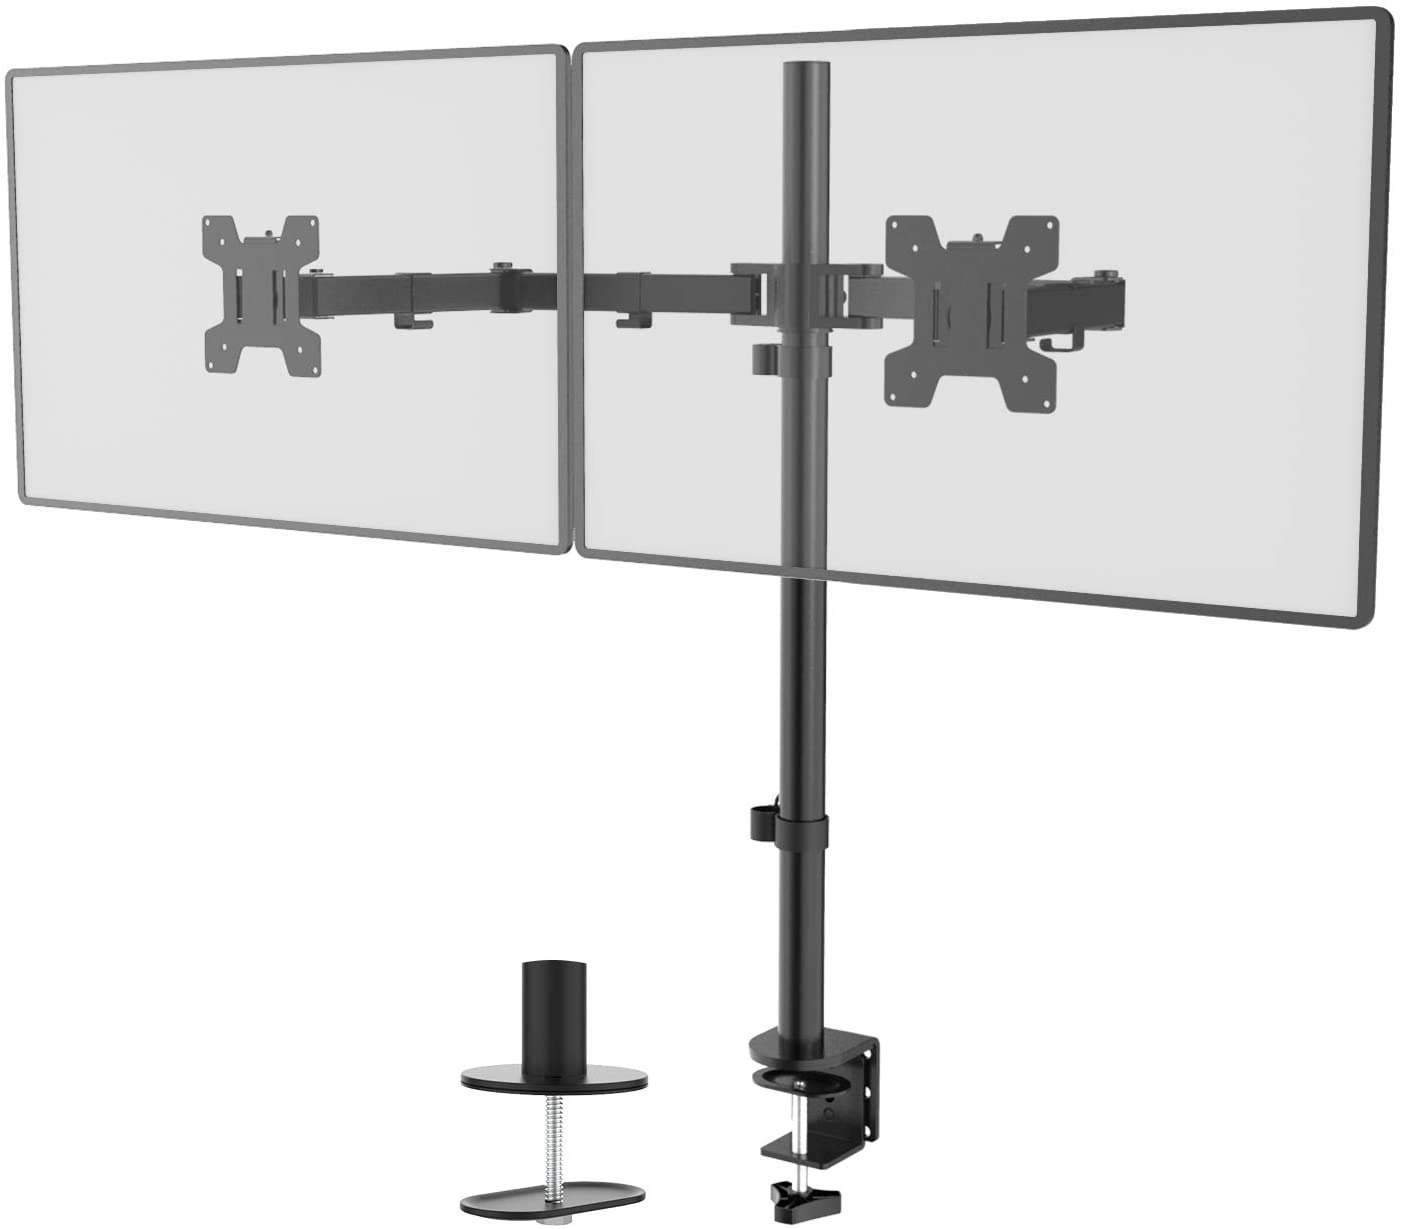 WALI Extra Tall Dual LCD Monitor Fully Adjustable Desk Mount Fits 2 Screens up